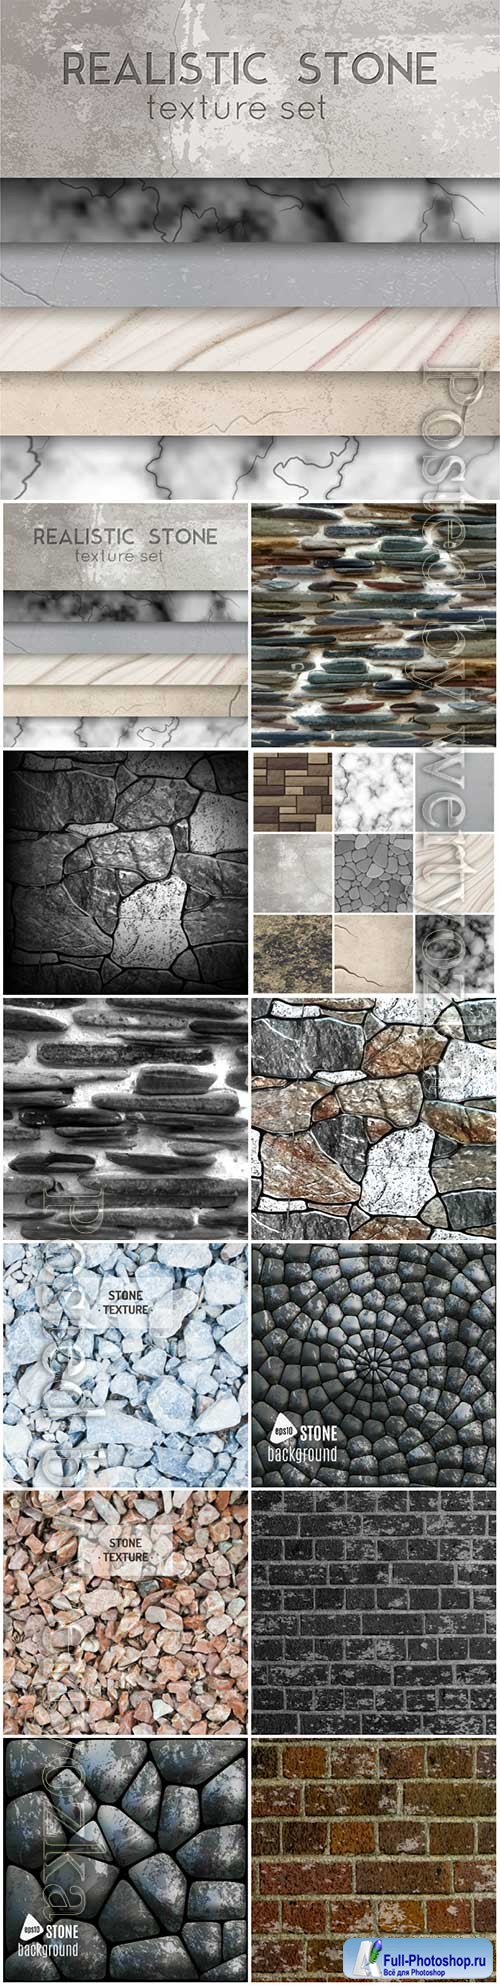 Realistic stone texture patterns collection